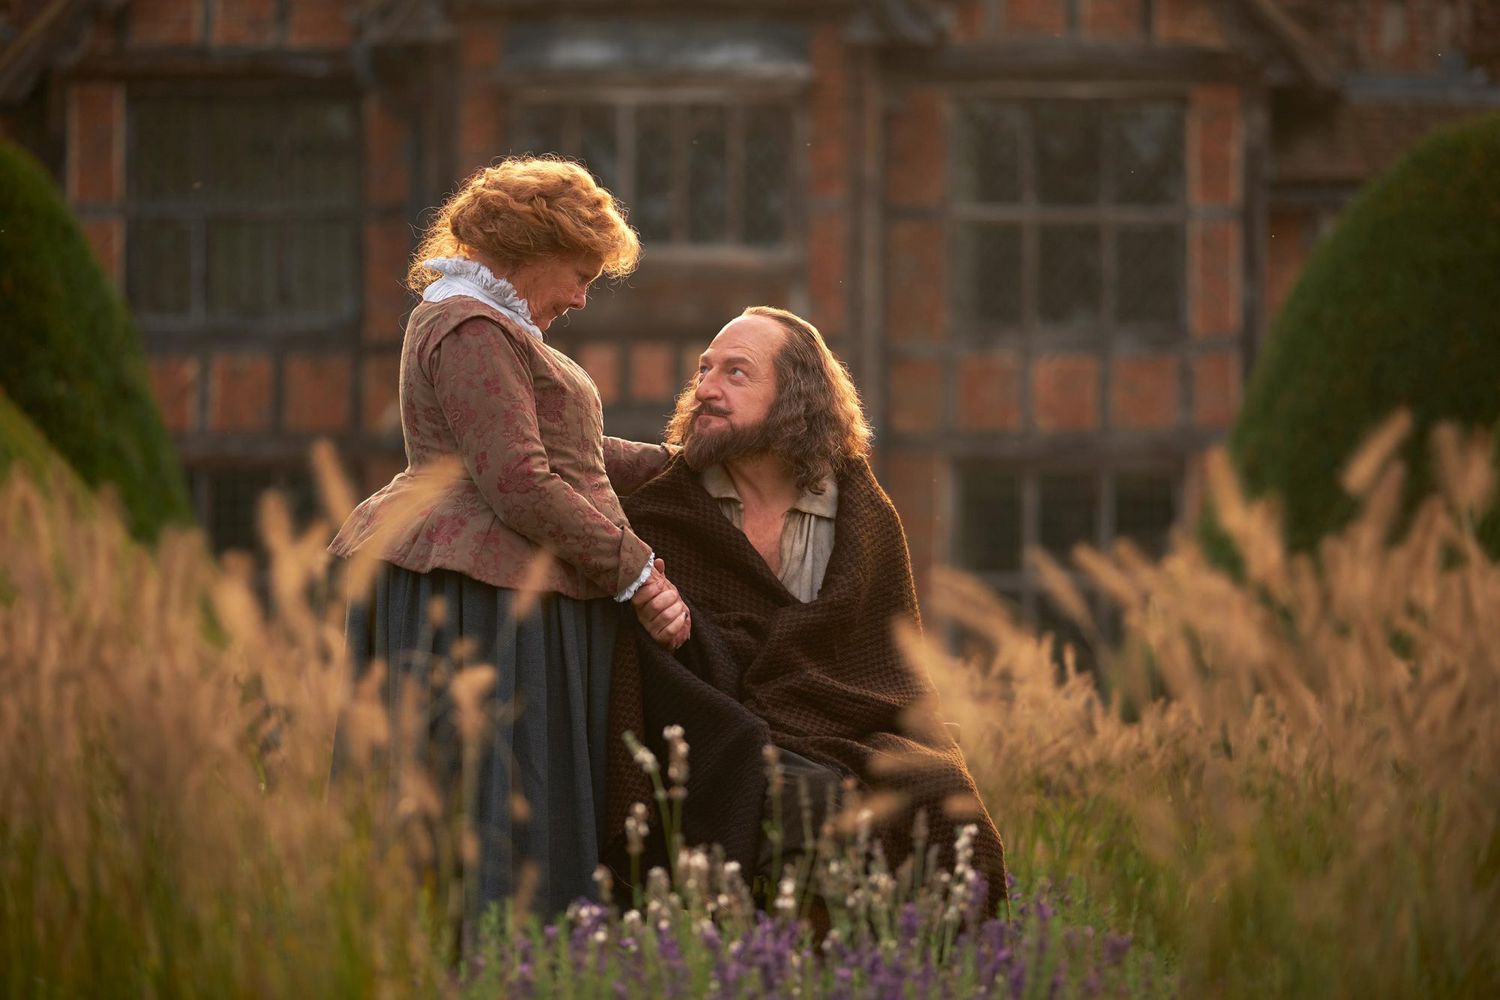 ALL IS TRUE Left to Right: Judi Dench as Anne Hathaway, Kenneth Branagh as William ShakespearePhoto by Robert Youngson, Courtesy of Sony Pictures Classics